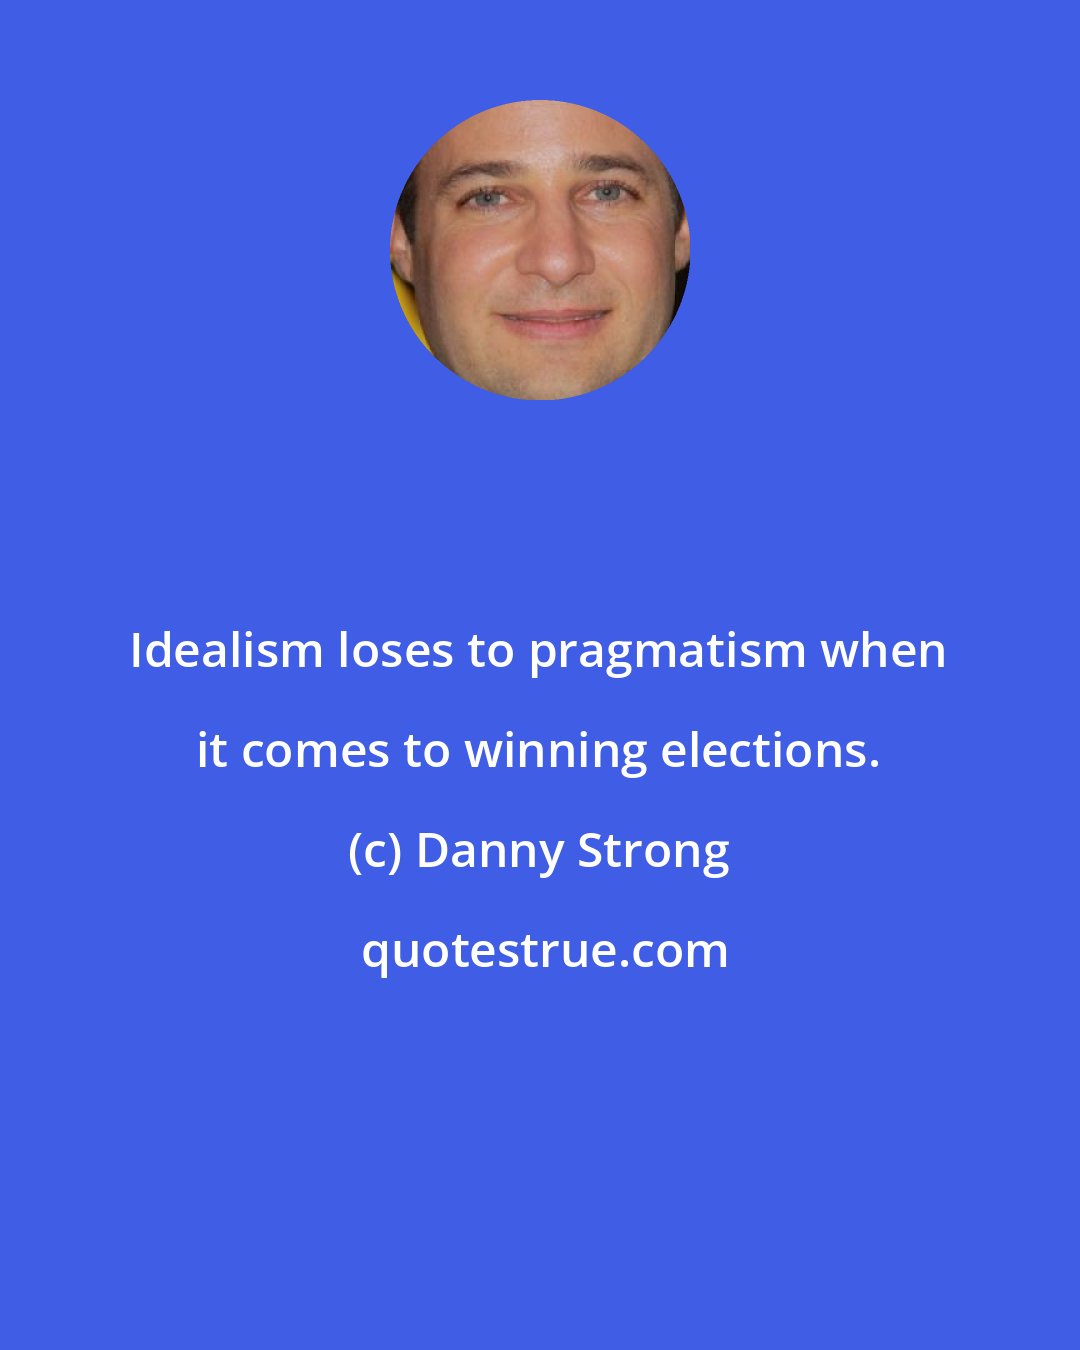 Danny Strong: Idealism loses to pragmatism when it comes to winning elections.